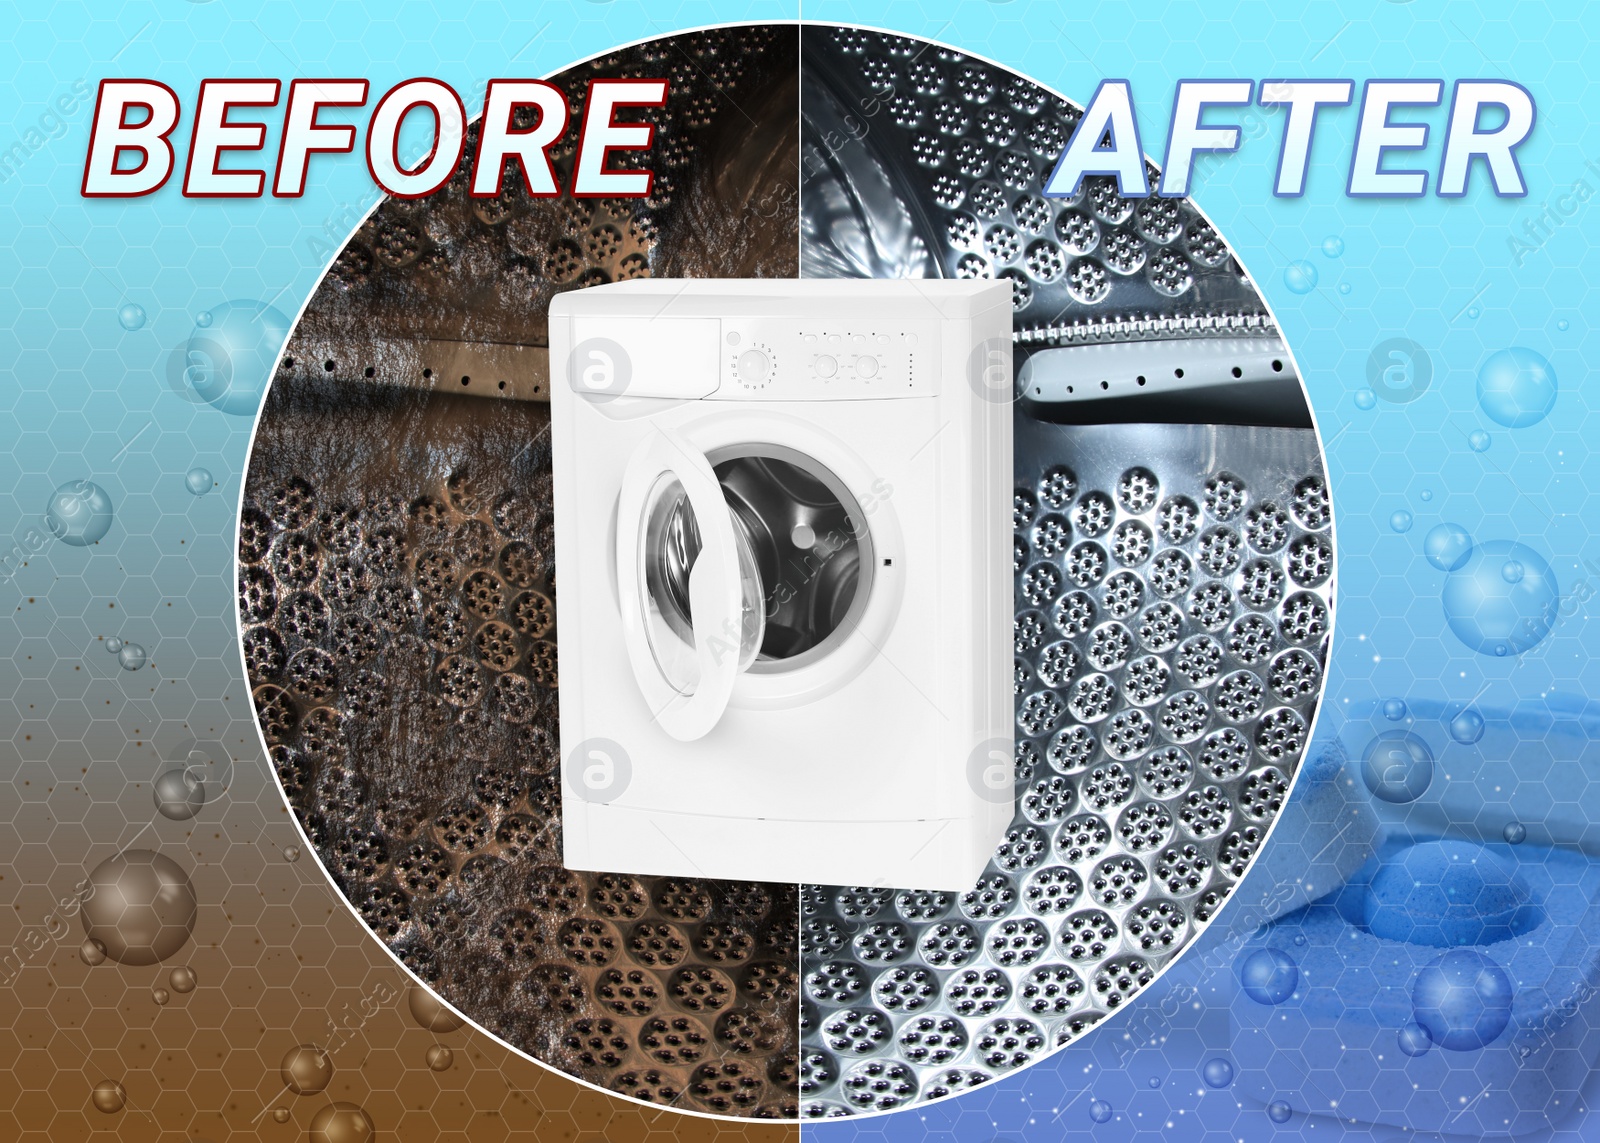 Image of Drum of washing machine before and after using water softener tablet, collage